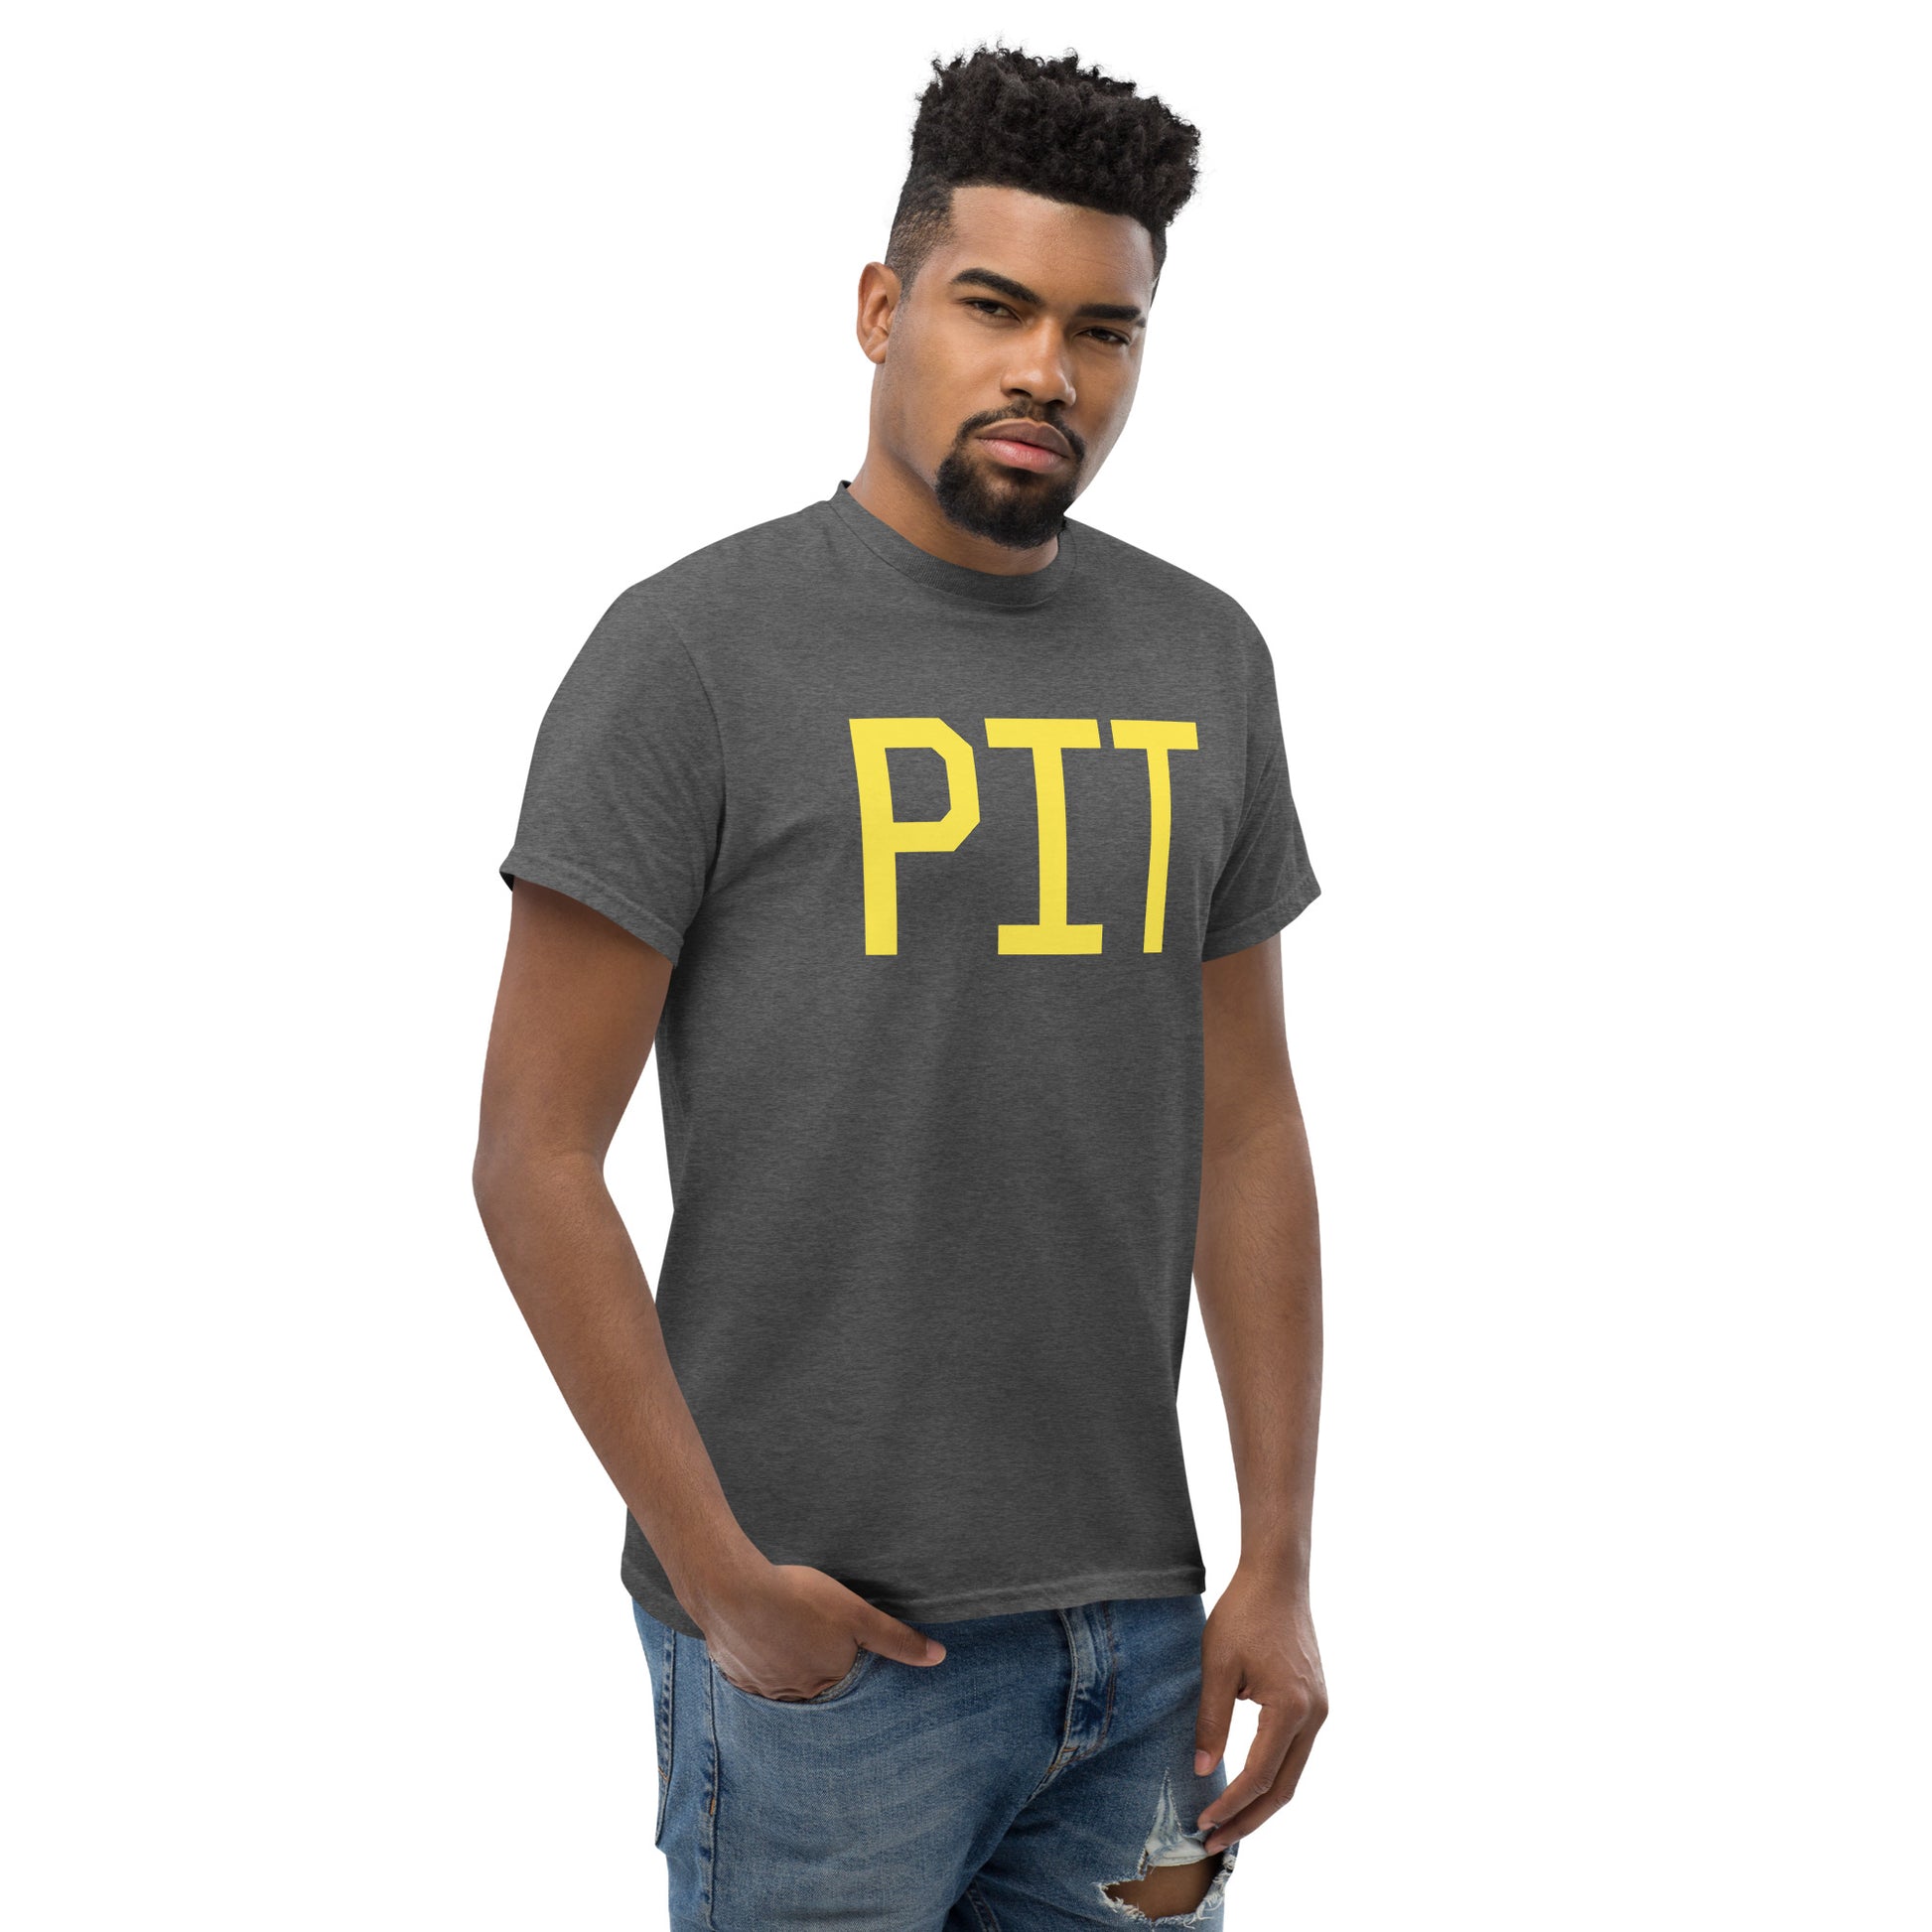 Aviation-Theme Men's T-Shirt - Yellow Graphic • PIT Pittsburgh • YHM Designs - Image 08